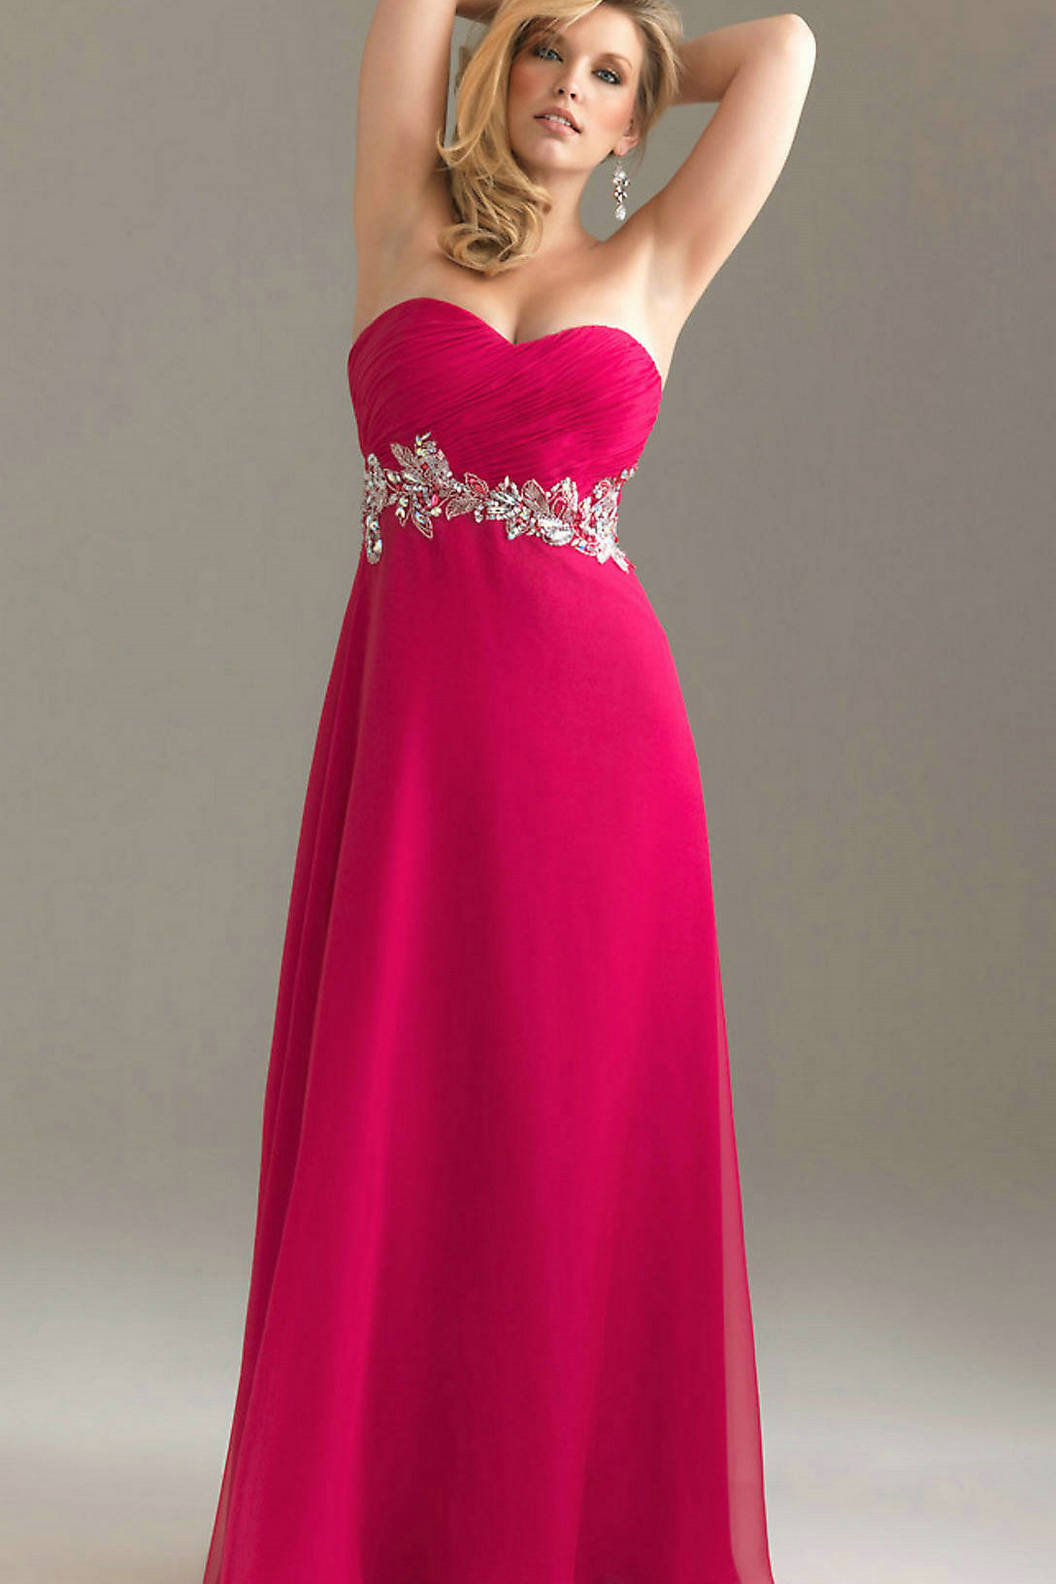 Something Related to Plus Size Prom Dresses Gowns Fashion Trend